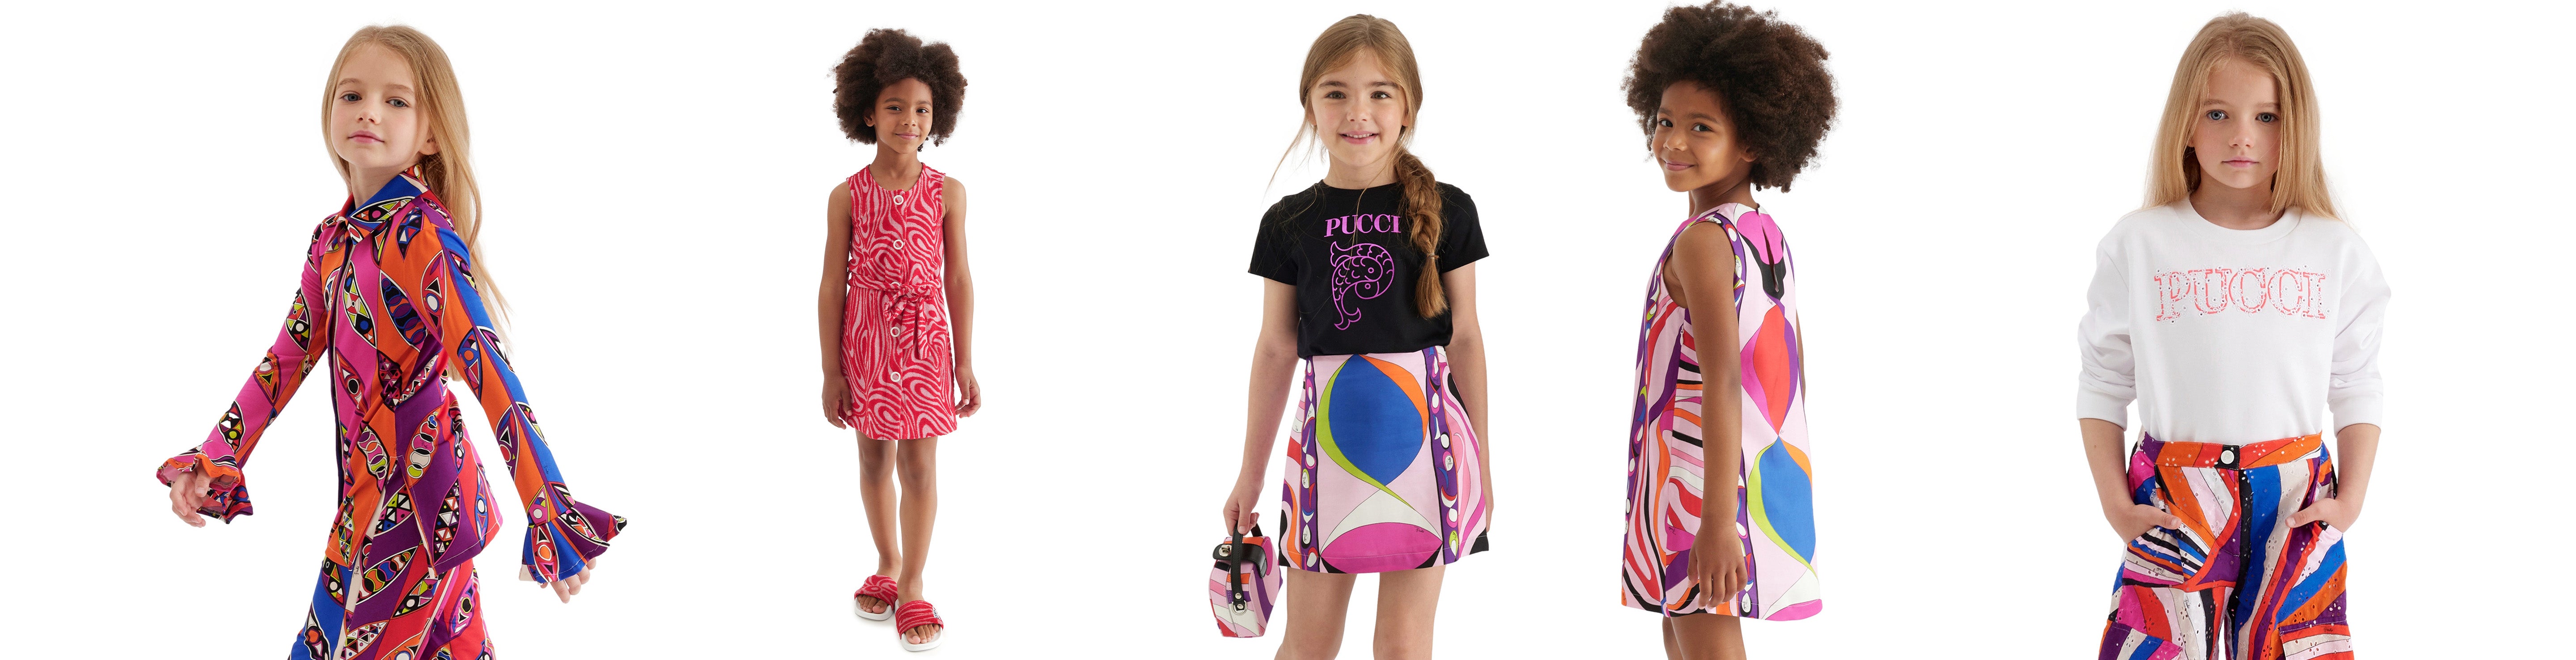 Emilio Pucci Kids Clothes,Shoes & Accessories | Childsplay Clothing US